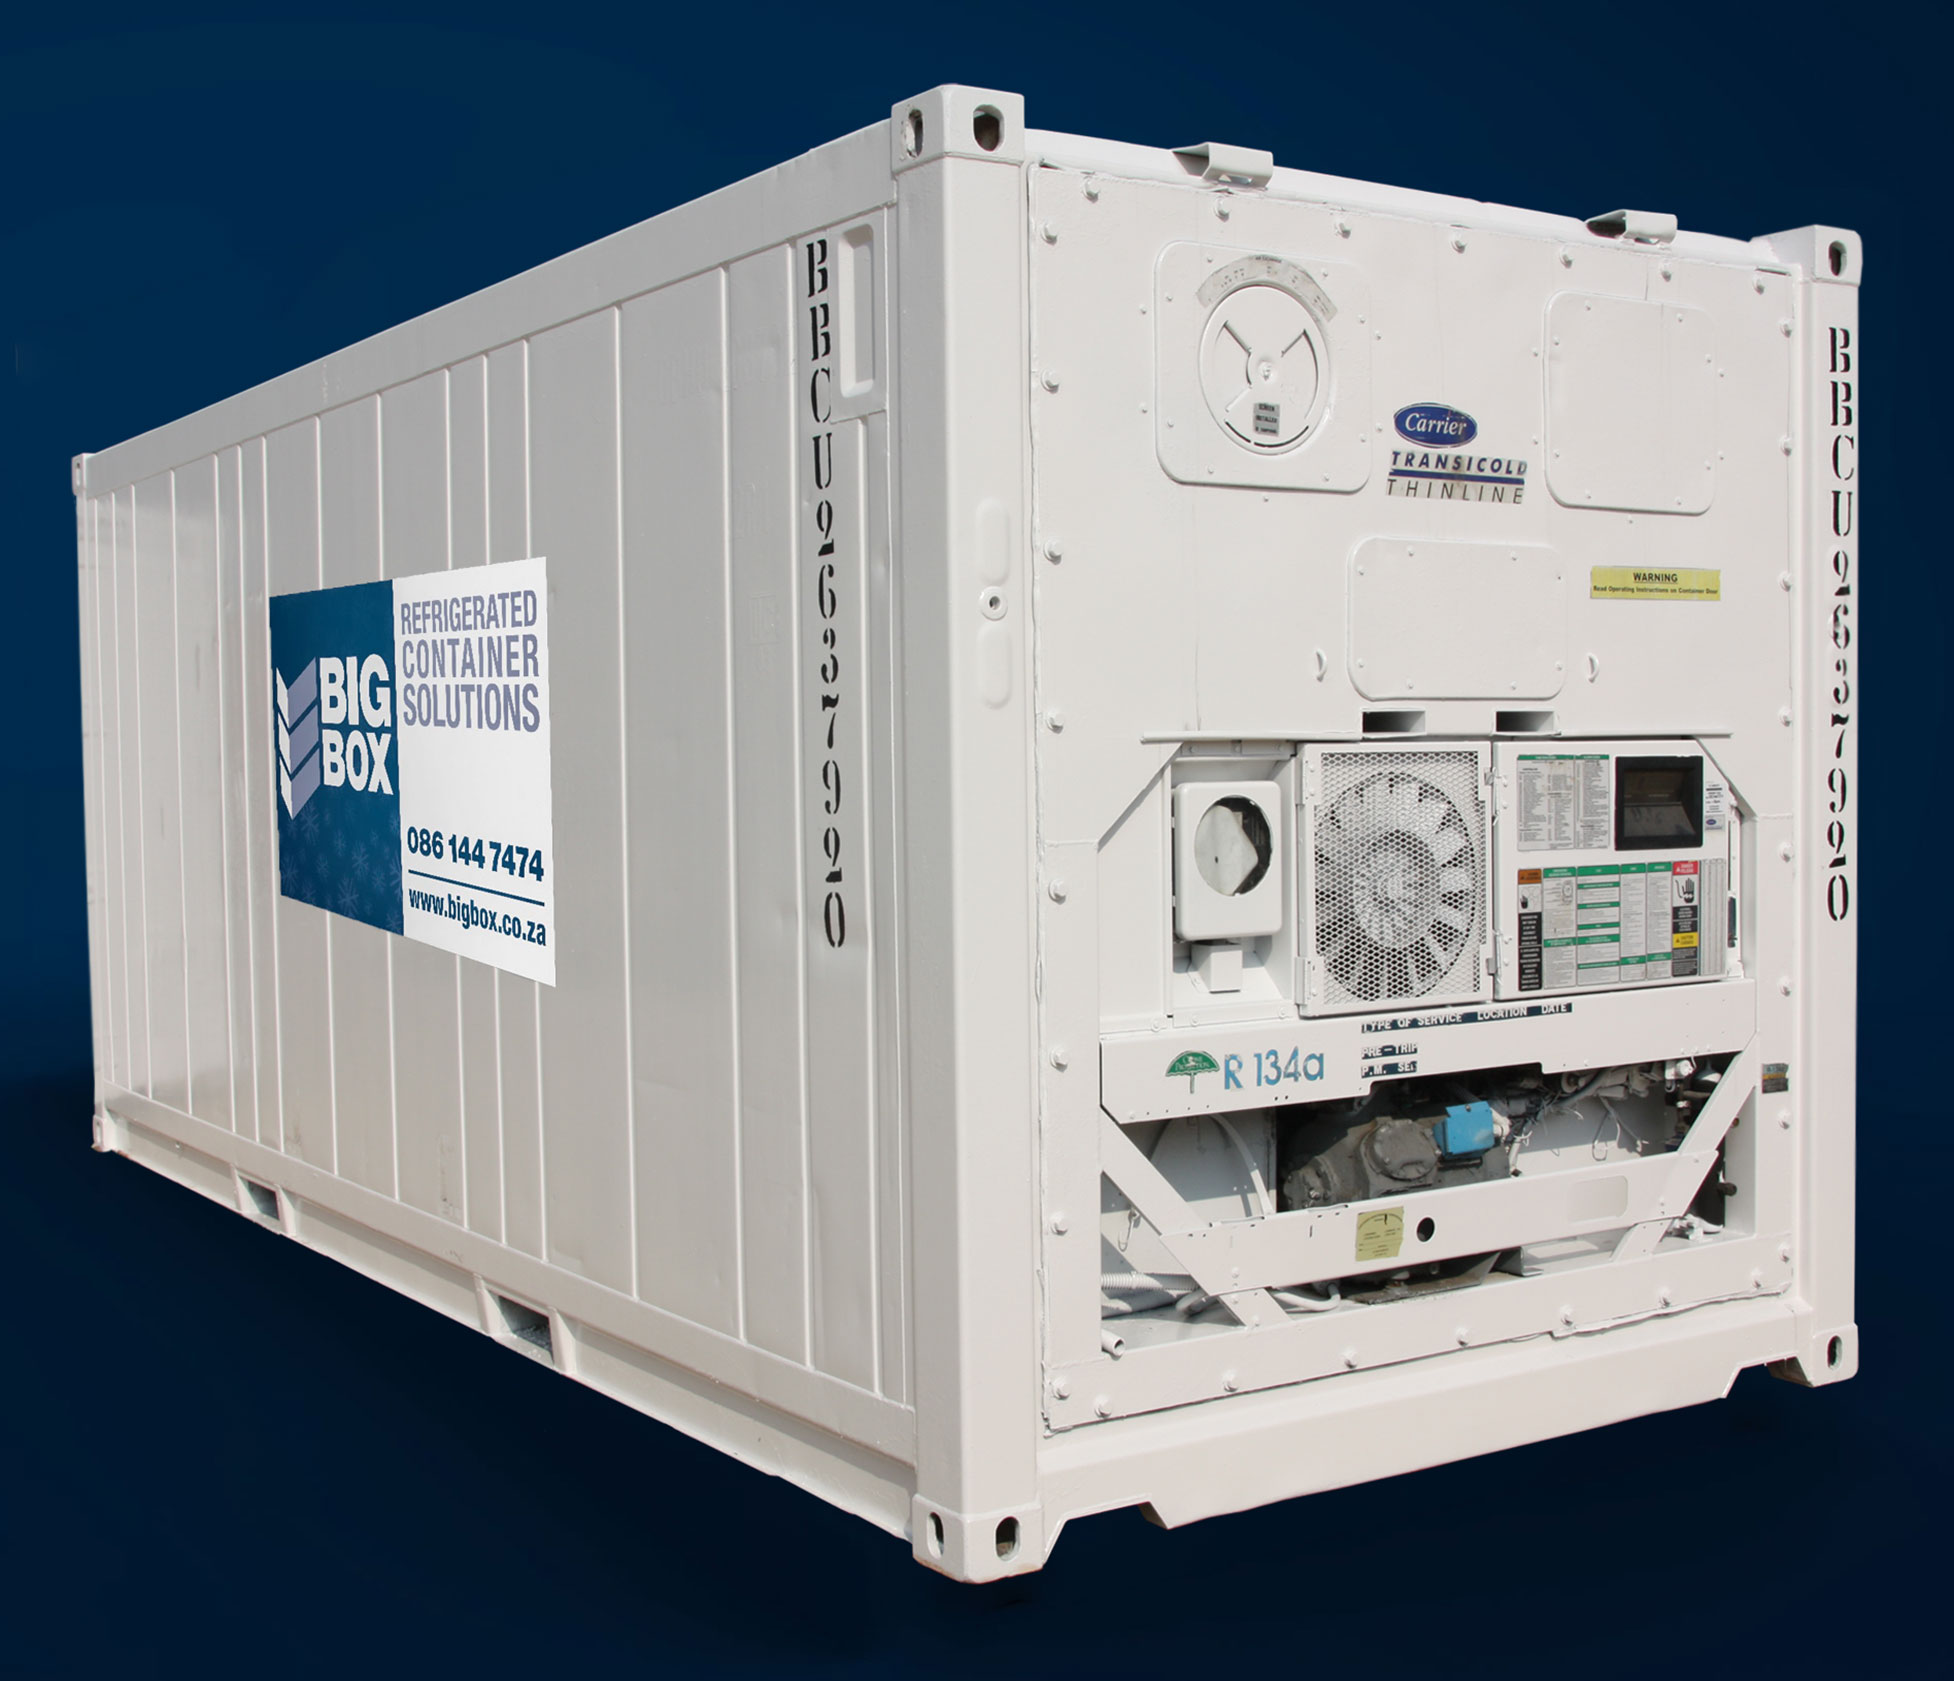 Refrigerated Containers - Big Box Containers